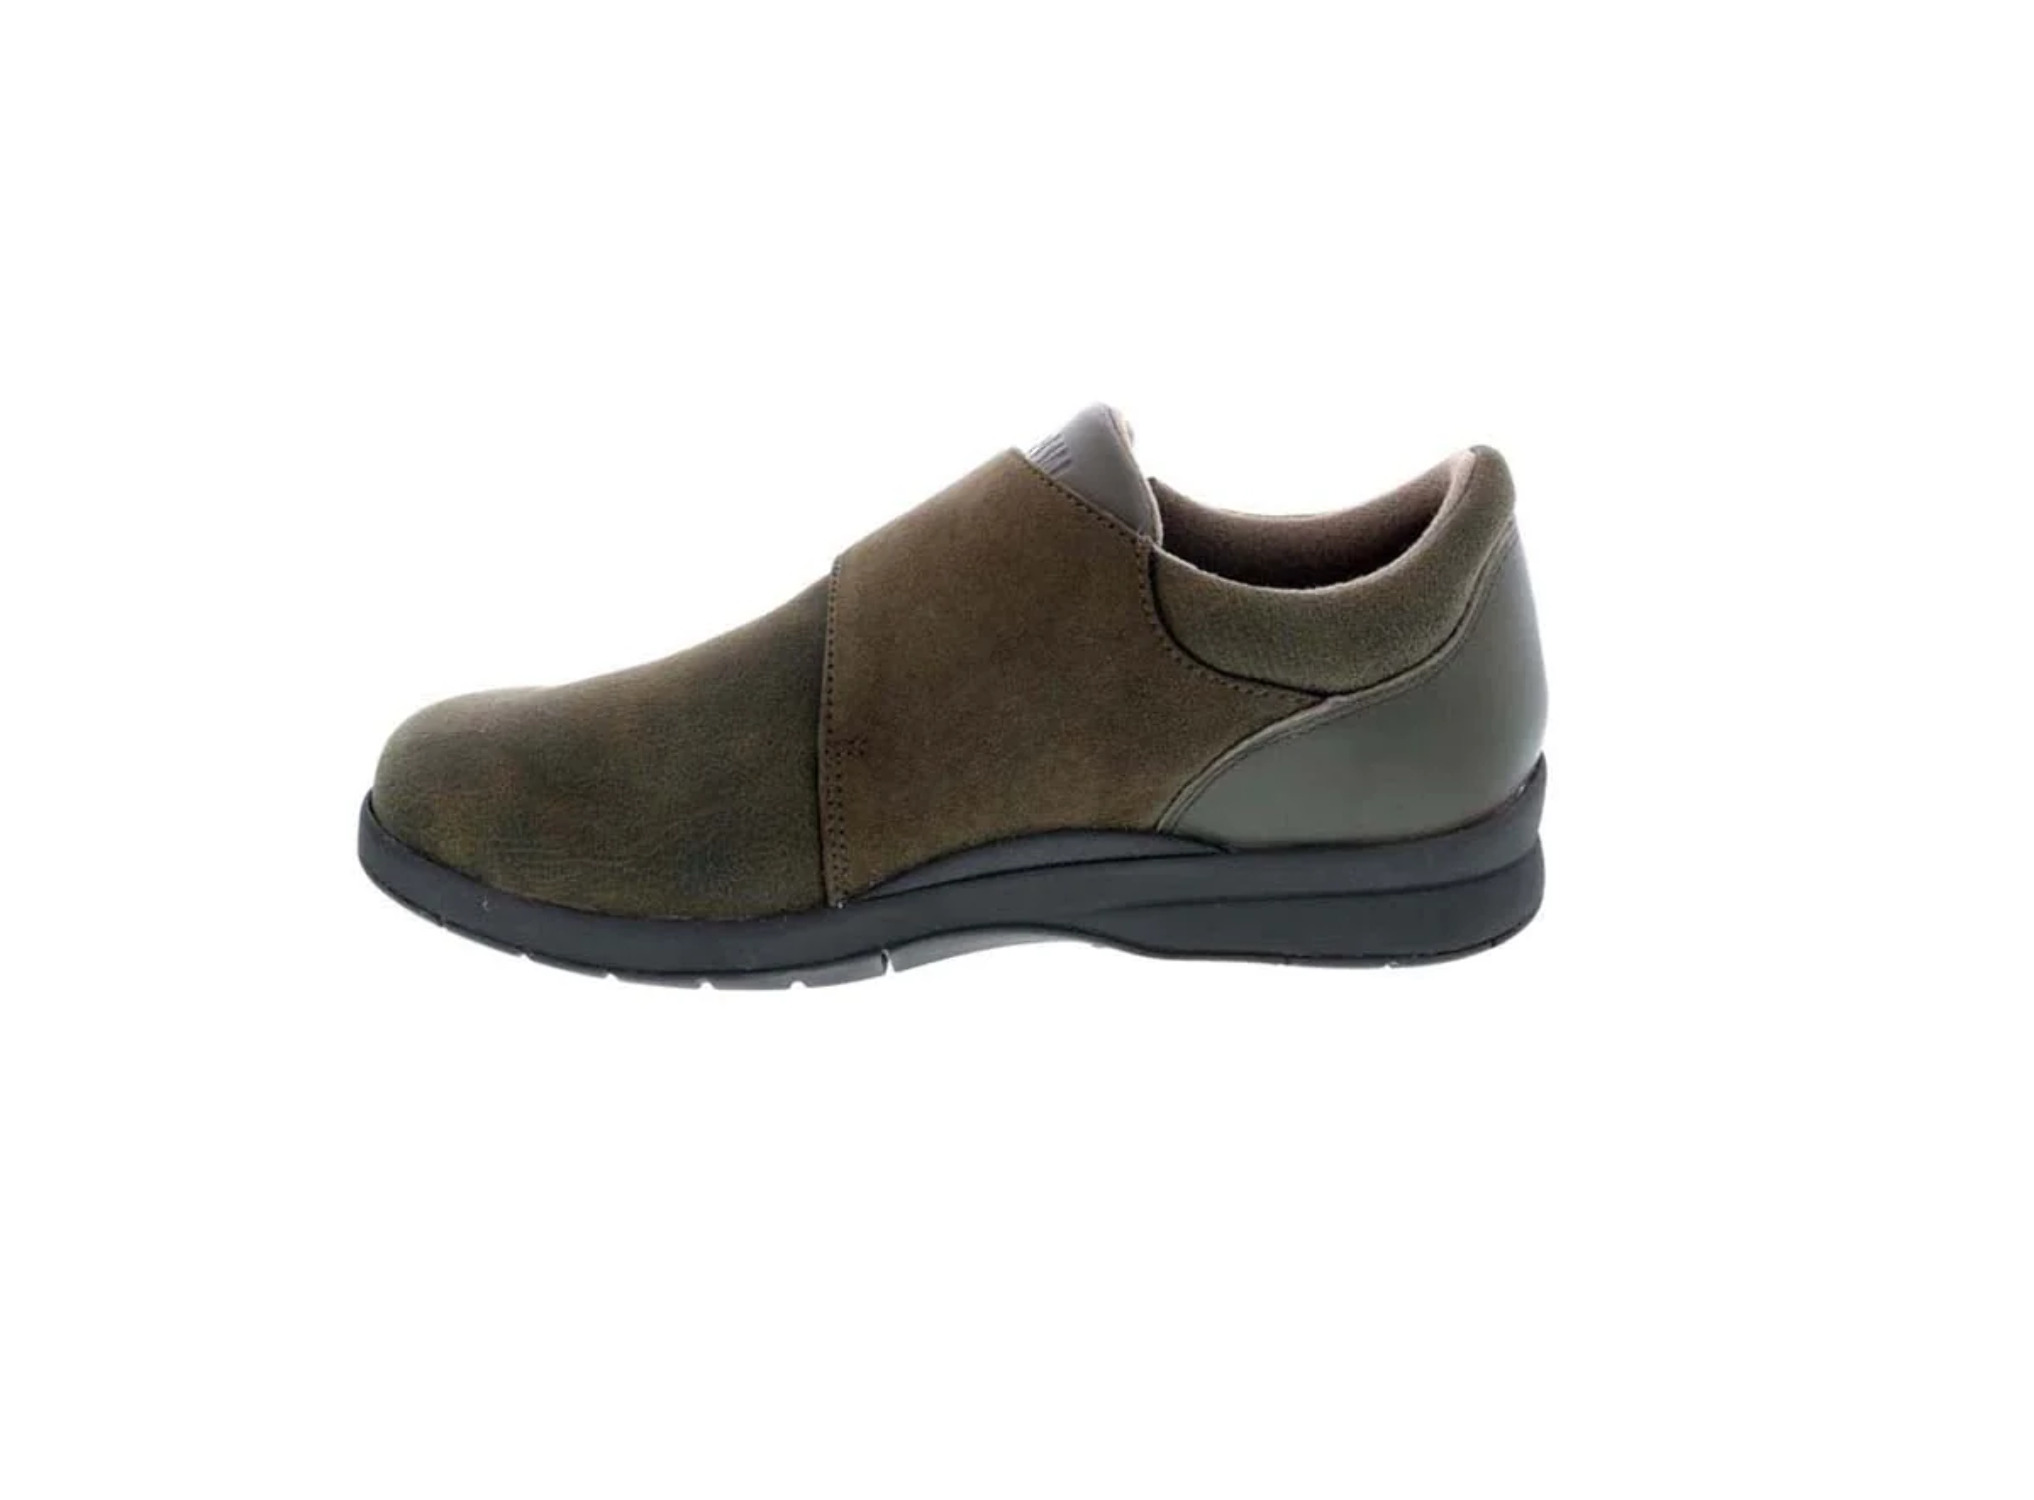 DREW MOONWALK WOMEN CASUAL SHOE IN OLIVE STRETCH LEATHER - image 2 of 4